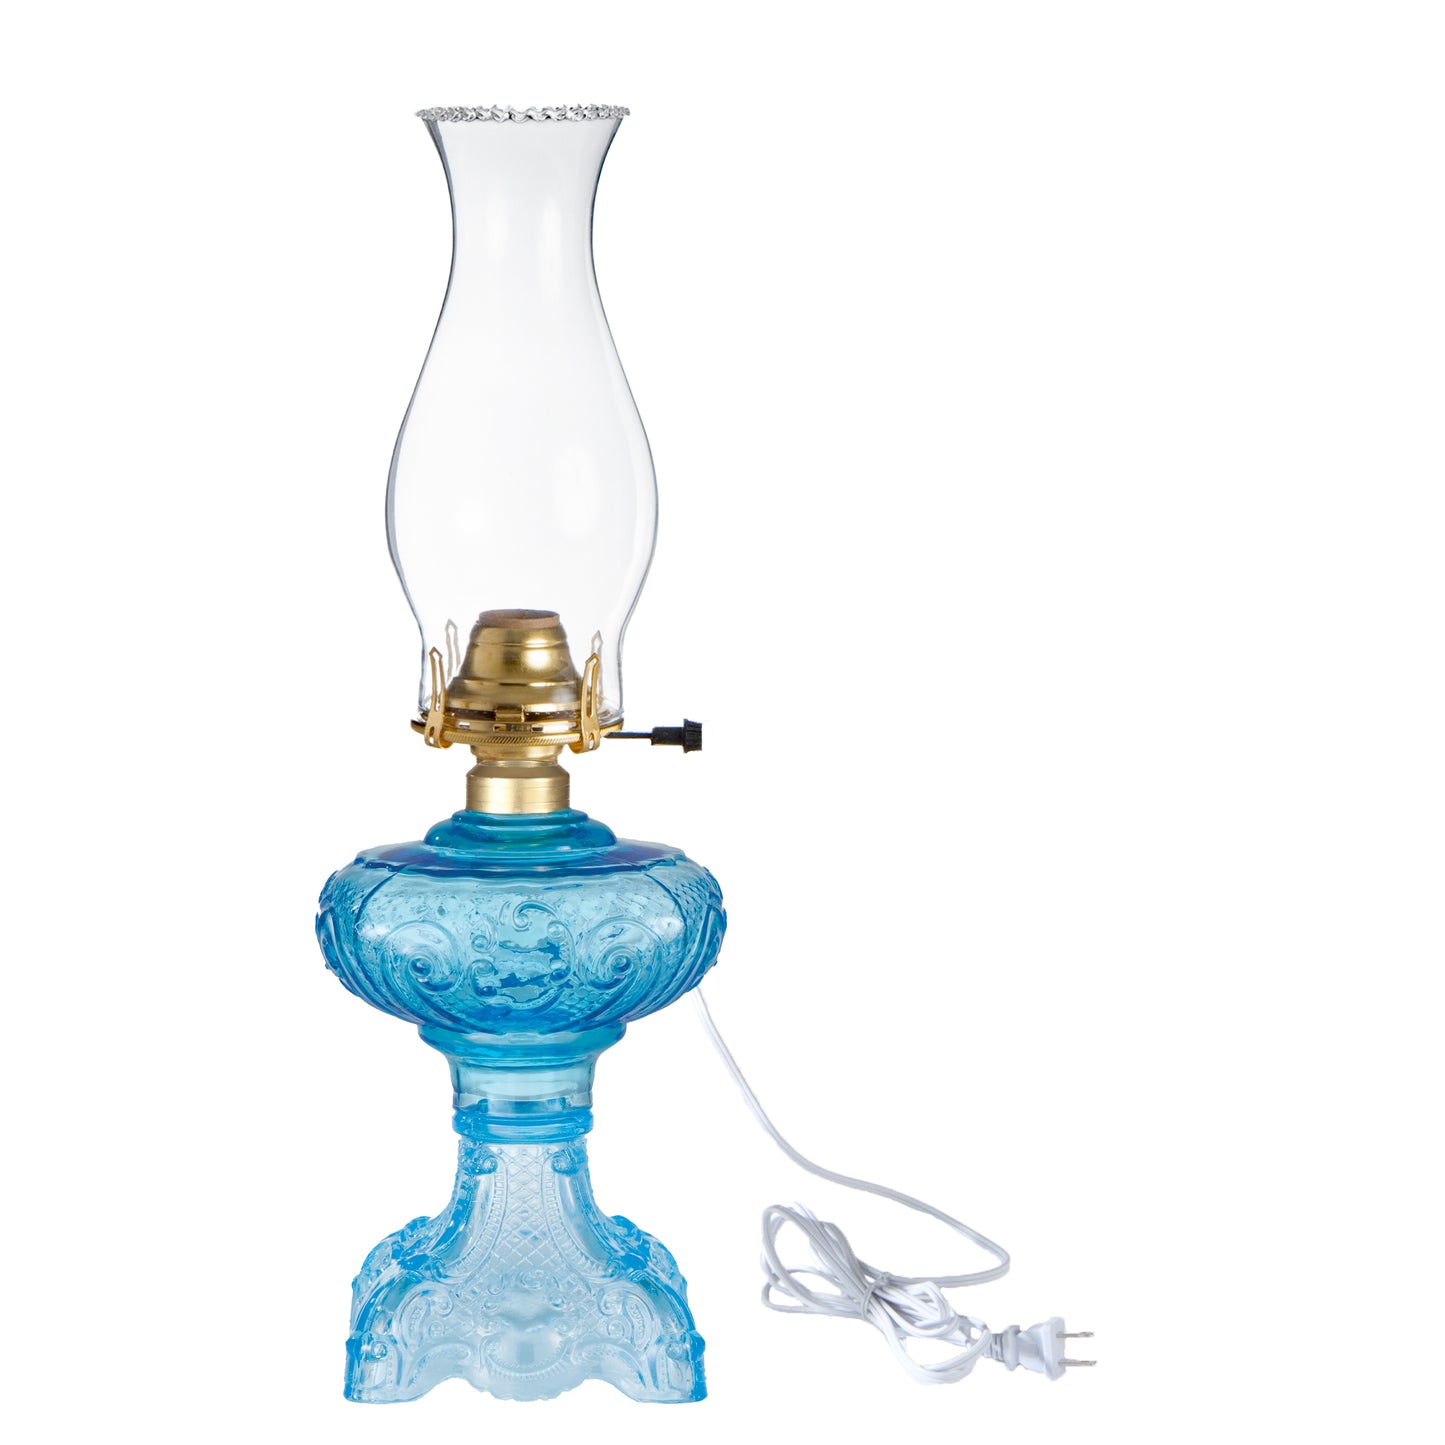 Electric Princess Feather Oil Lamps Complete with Electric Burner and Chimney (66499E)